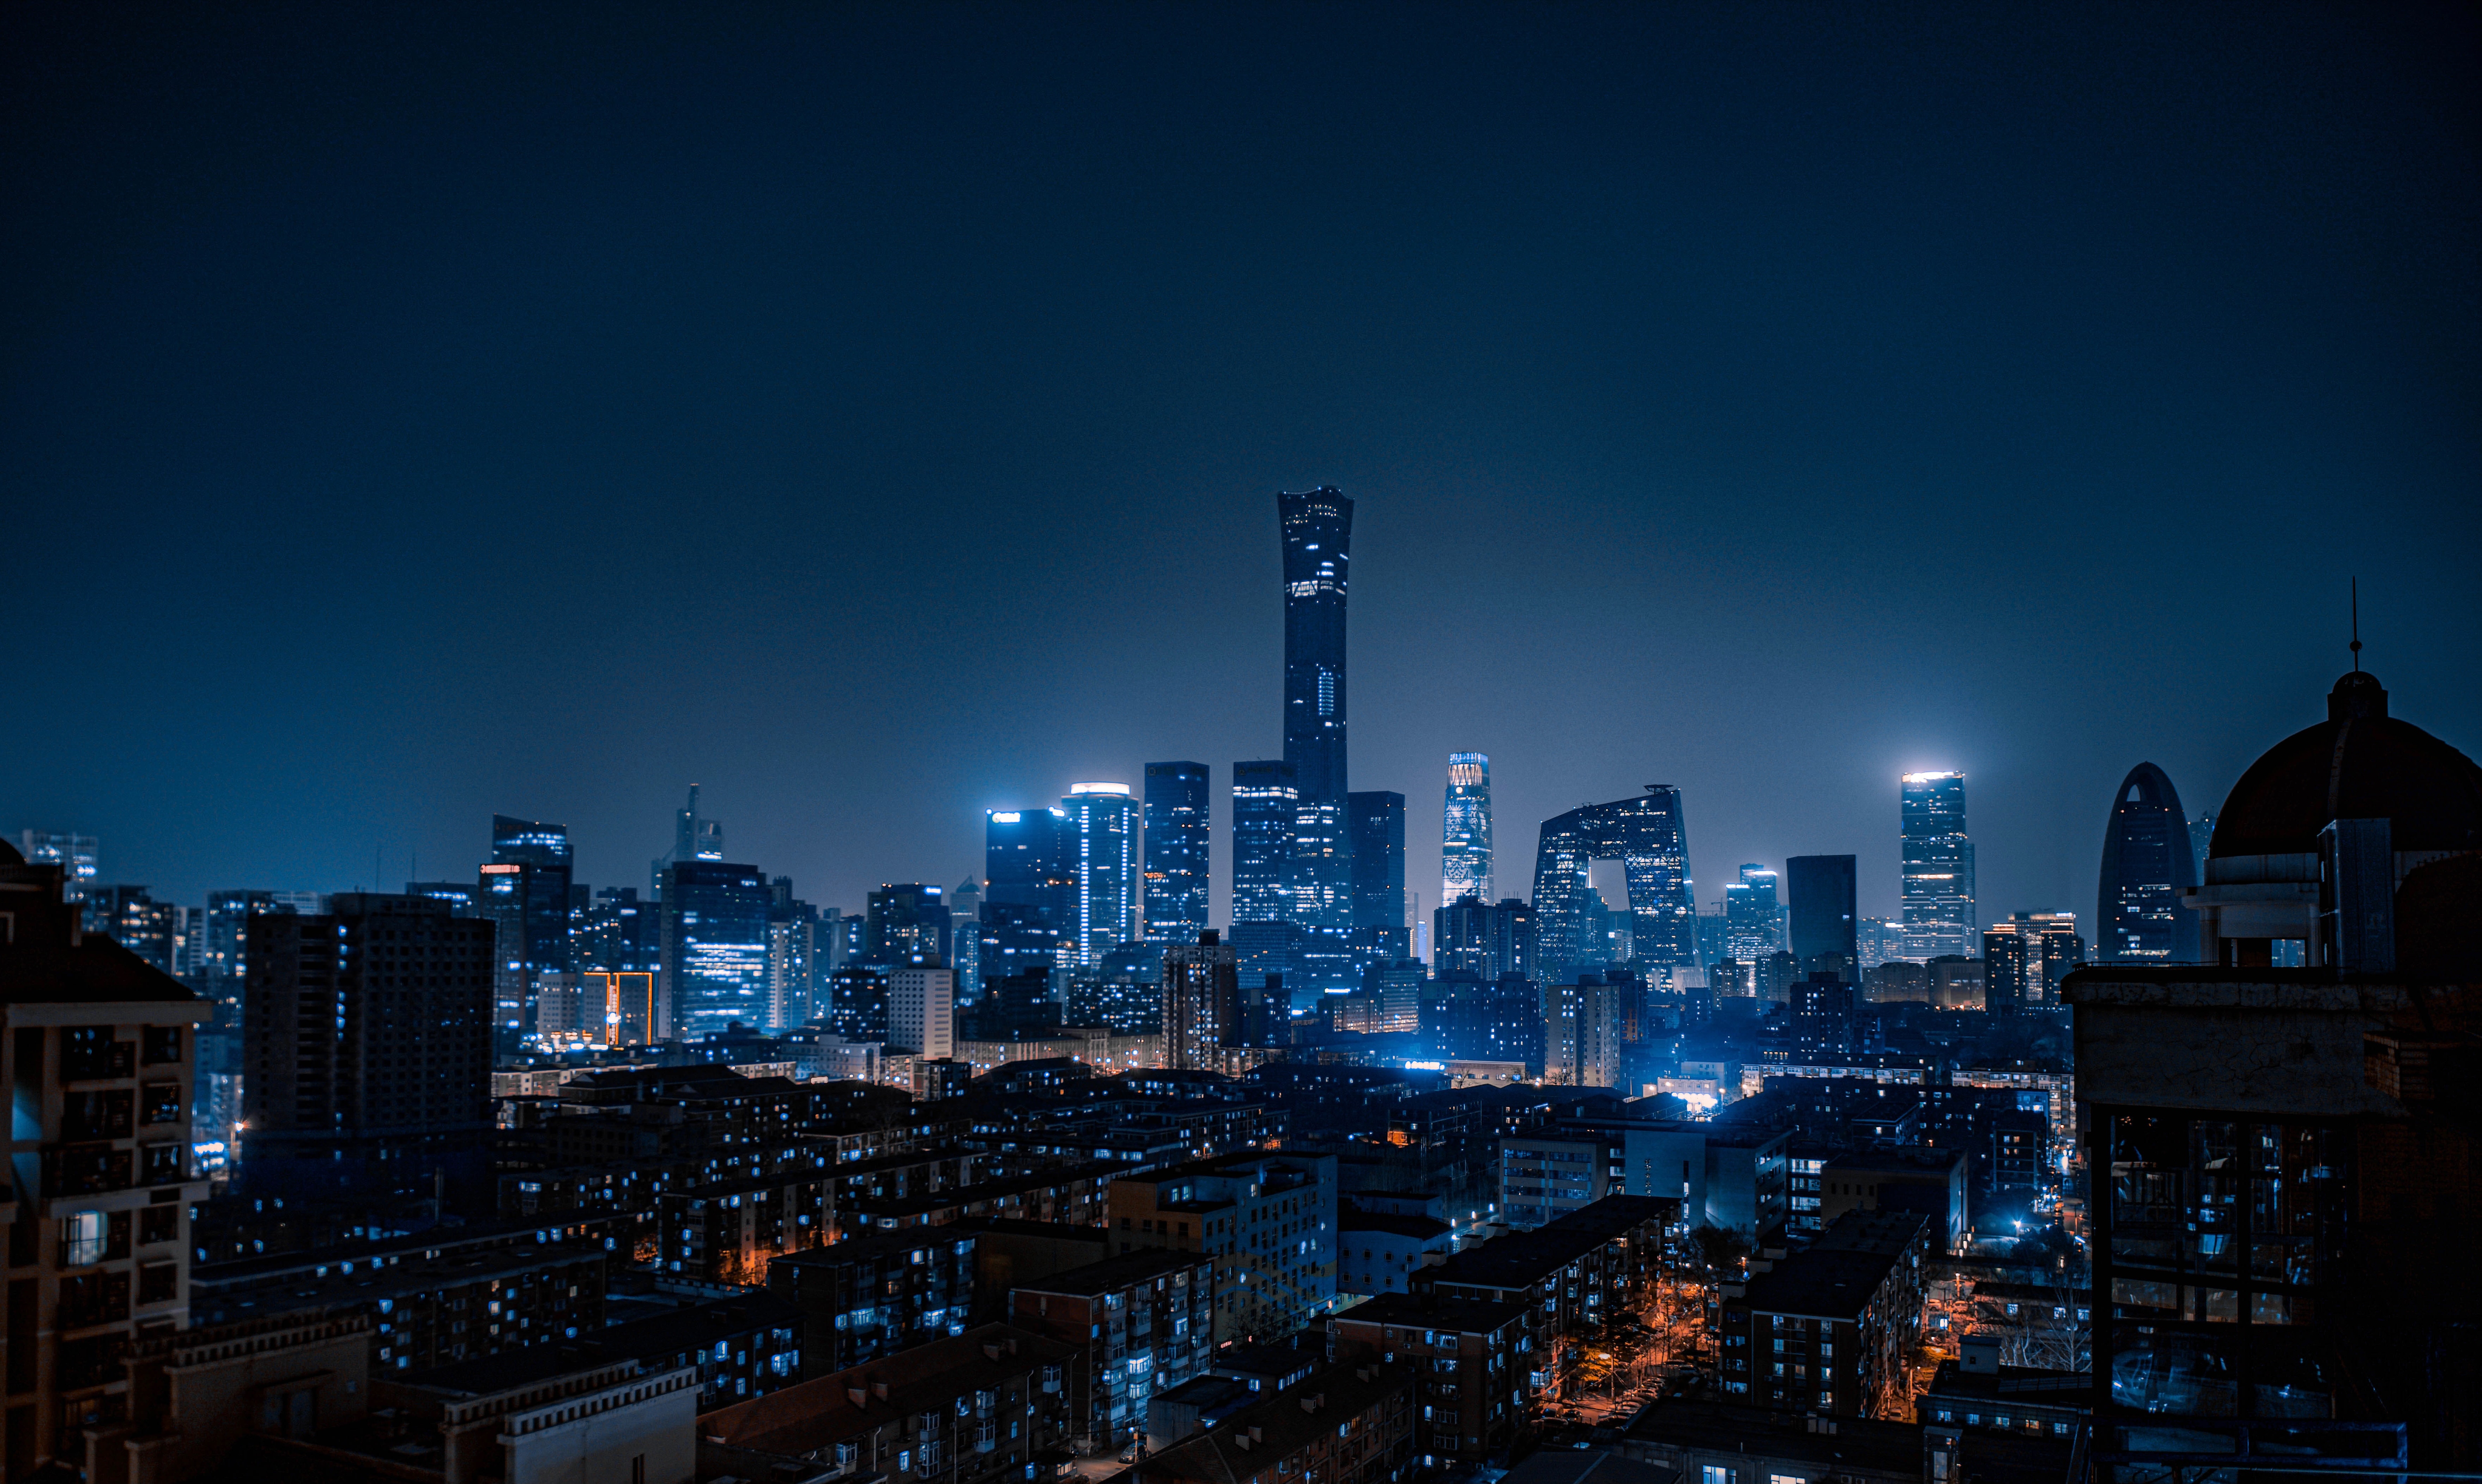 night, view from above, cities, city, building, lights, china, beijing HD for desktop 1080p